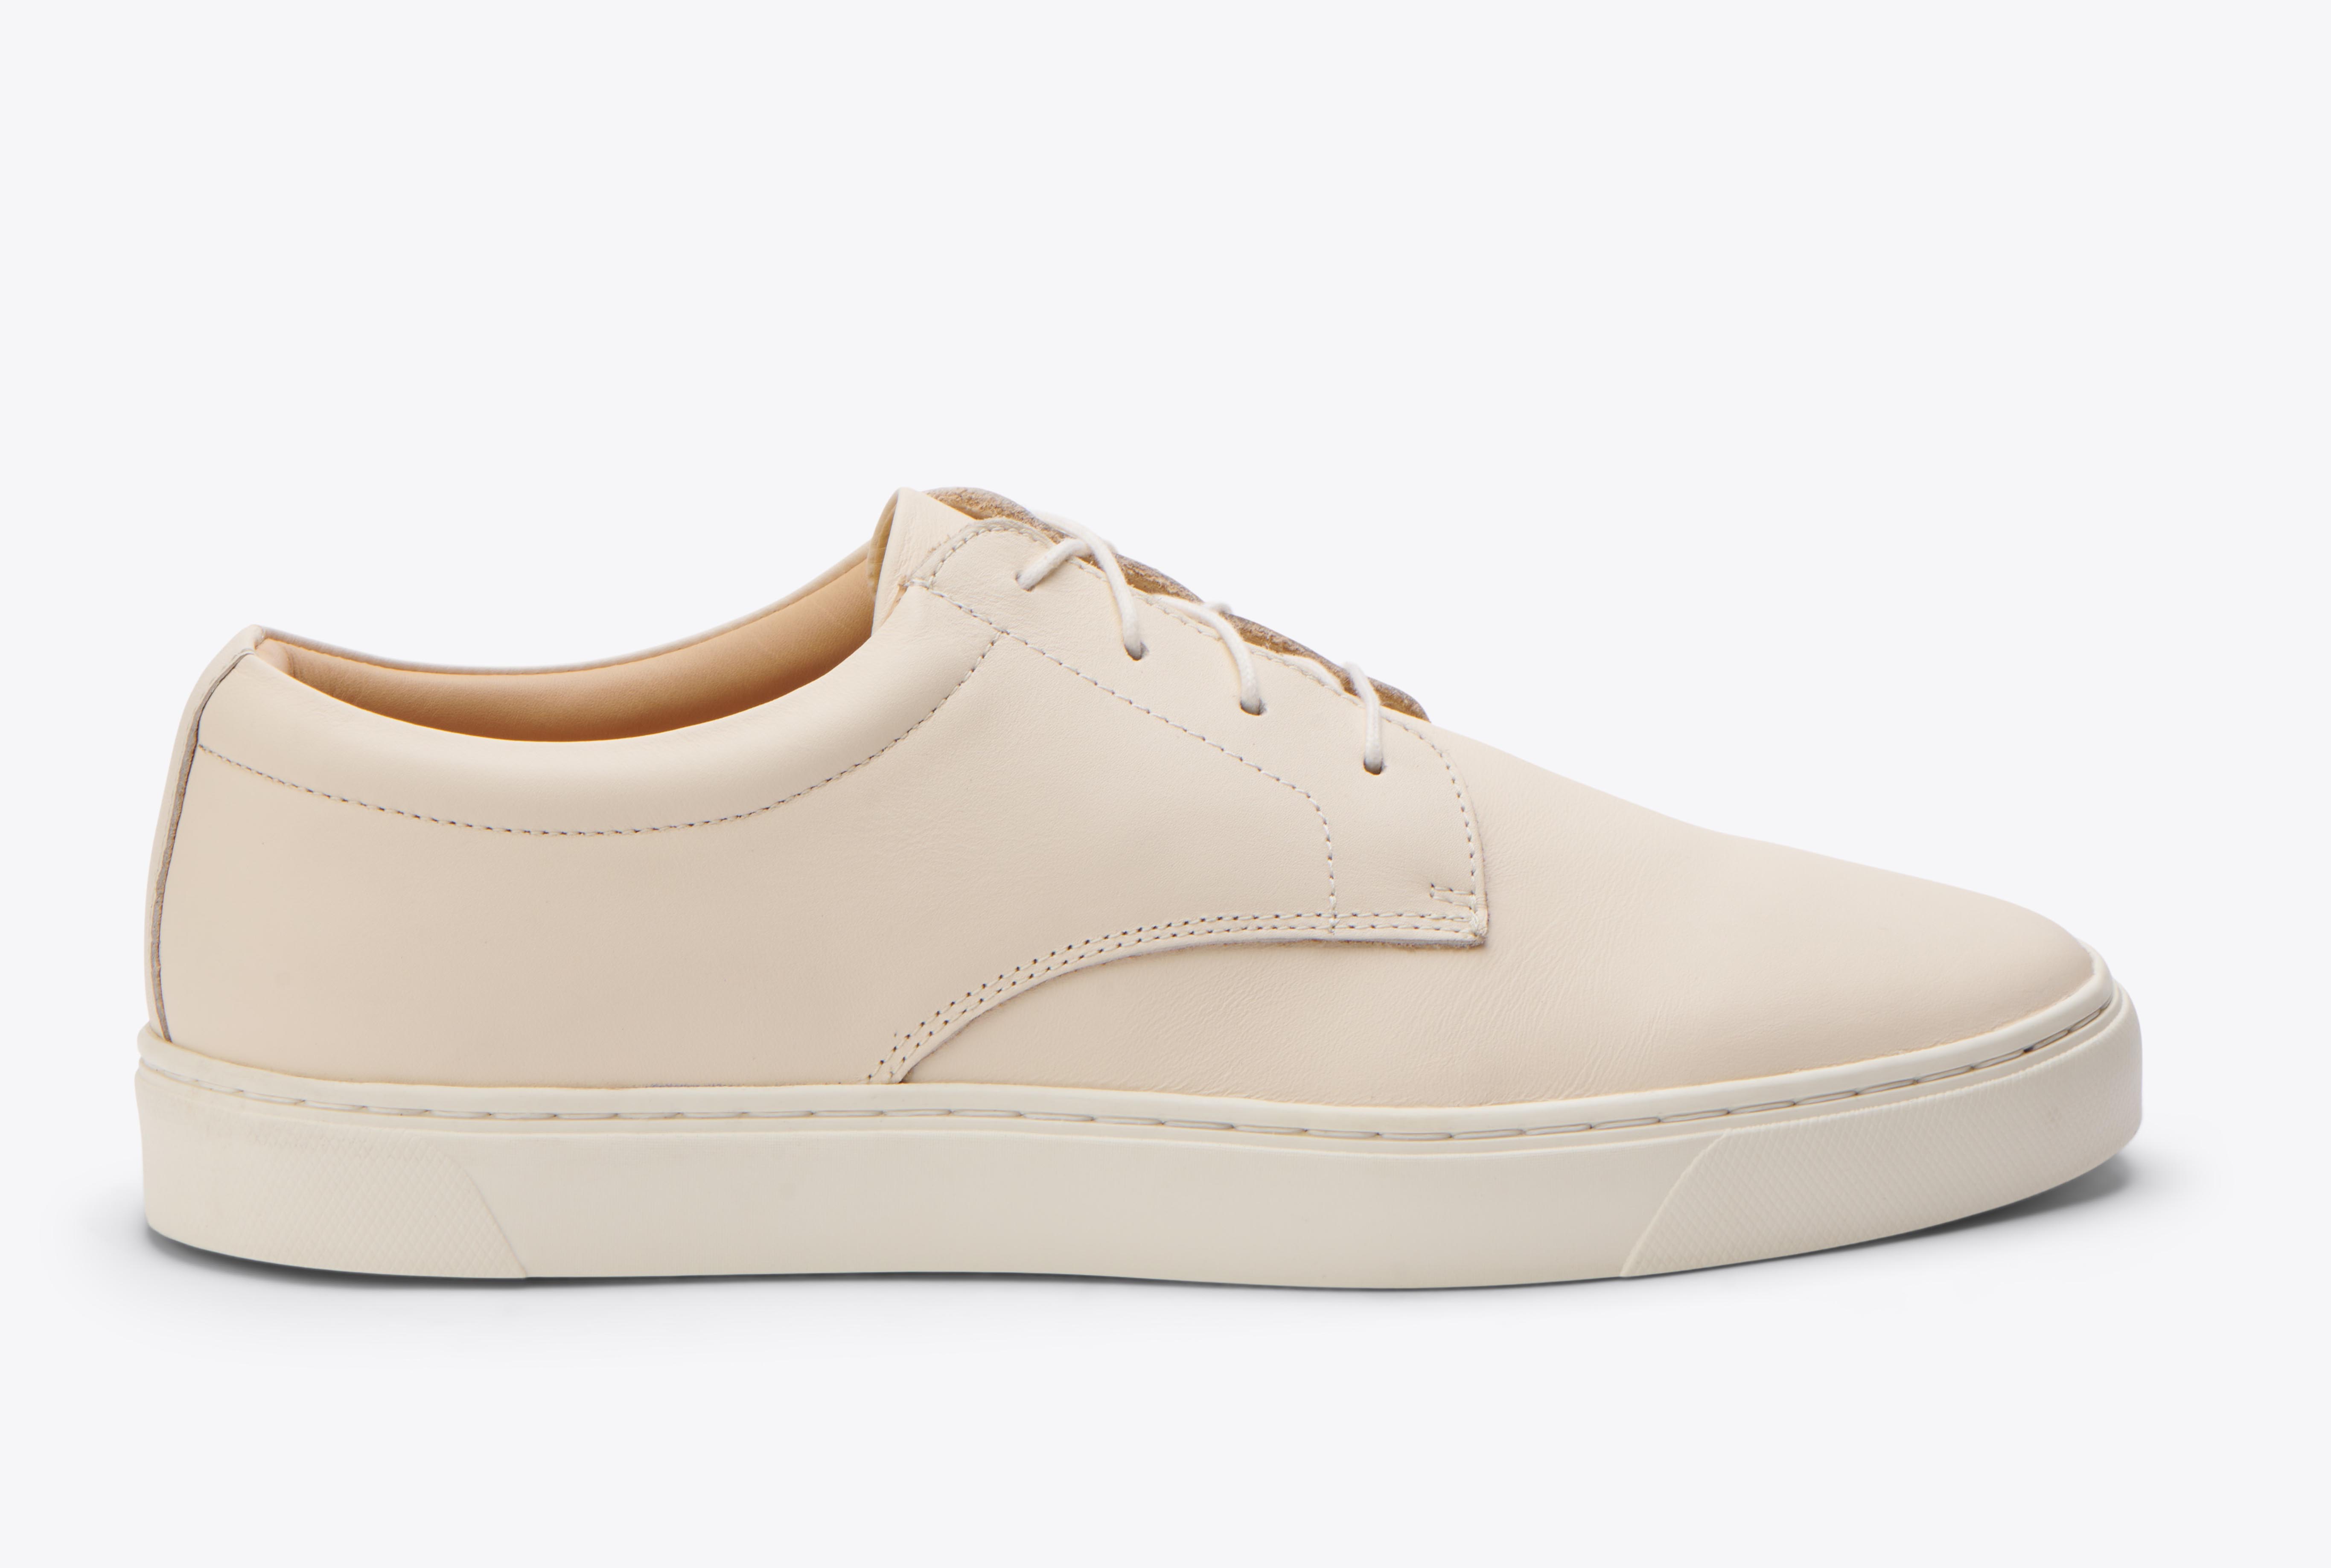 Nisolo Everyday Low Top Sneaker Bone - Every Nisolo product is built on the foundation of comfort, function, and design. 